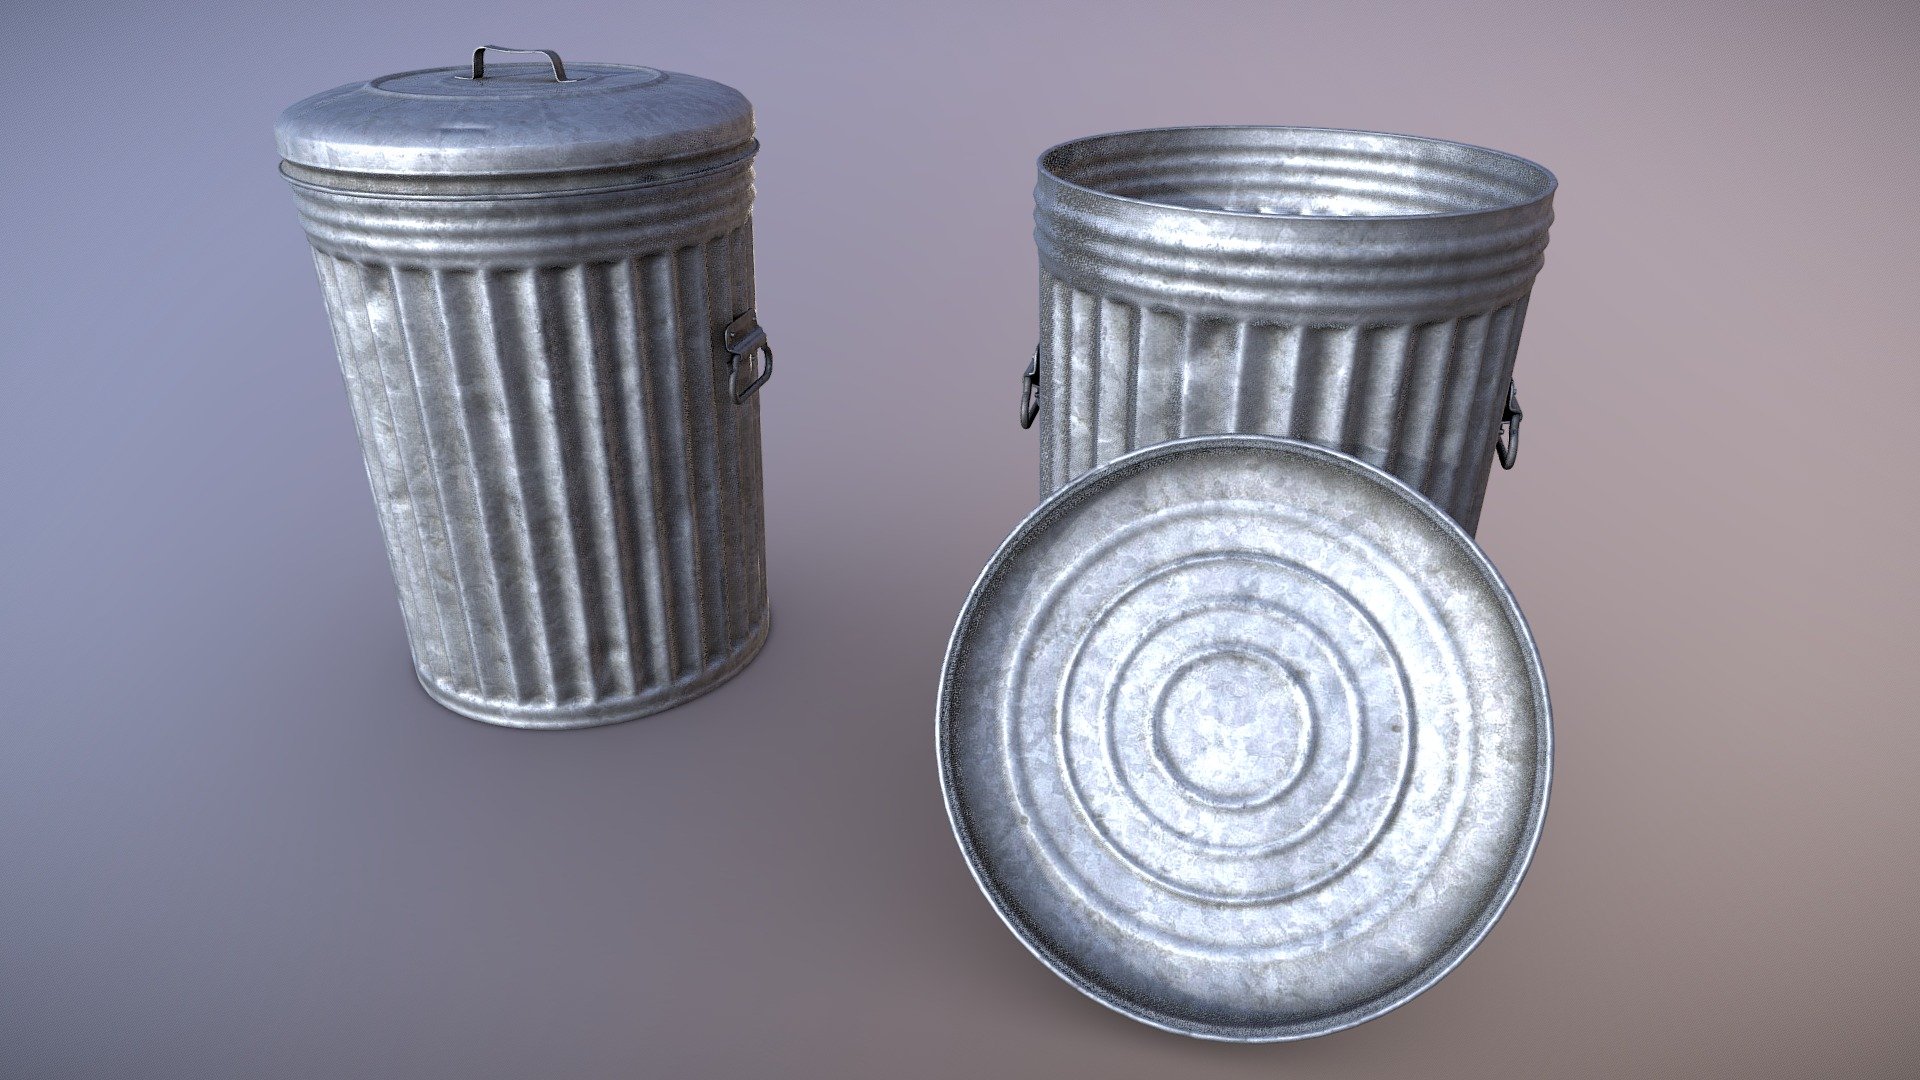 Trash Can designed for PBR engines. Lid is removable and interior is fully modelled.

Originally modeled in 3ds Max 2019. Download includes .max, .fbx, .obj, metal/roughness PBR textures, textures for Unity and Unreal Engines, and additional texture maps such as curvature, AO, and color ID.

Includes 3 levels of LOD.

Specs


Scaled to approximate real world size (centimeters)
Mesh is in tris. Quaded version of the mesh also included.

Textures

1 Material: 2048x2048 Base Color, Roughness, Metallic, Normal, AO

Unity Engine 5 Textures: AlbedoTransparency, MetallicSmoothness, Normal, Occlusion

Unreal Engine 4 Textures: BaseColor, Normal, RoughnessMetallicAO - Trash Can - For Sale - Buy Royalty Free 3D model by Luchador (@Luchador90) 3d model